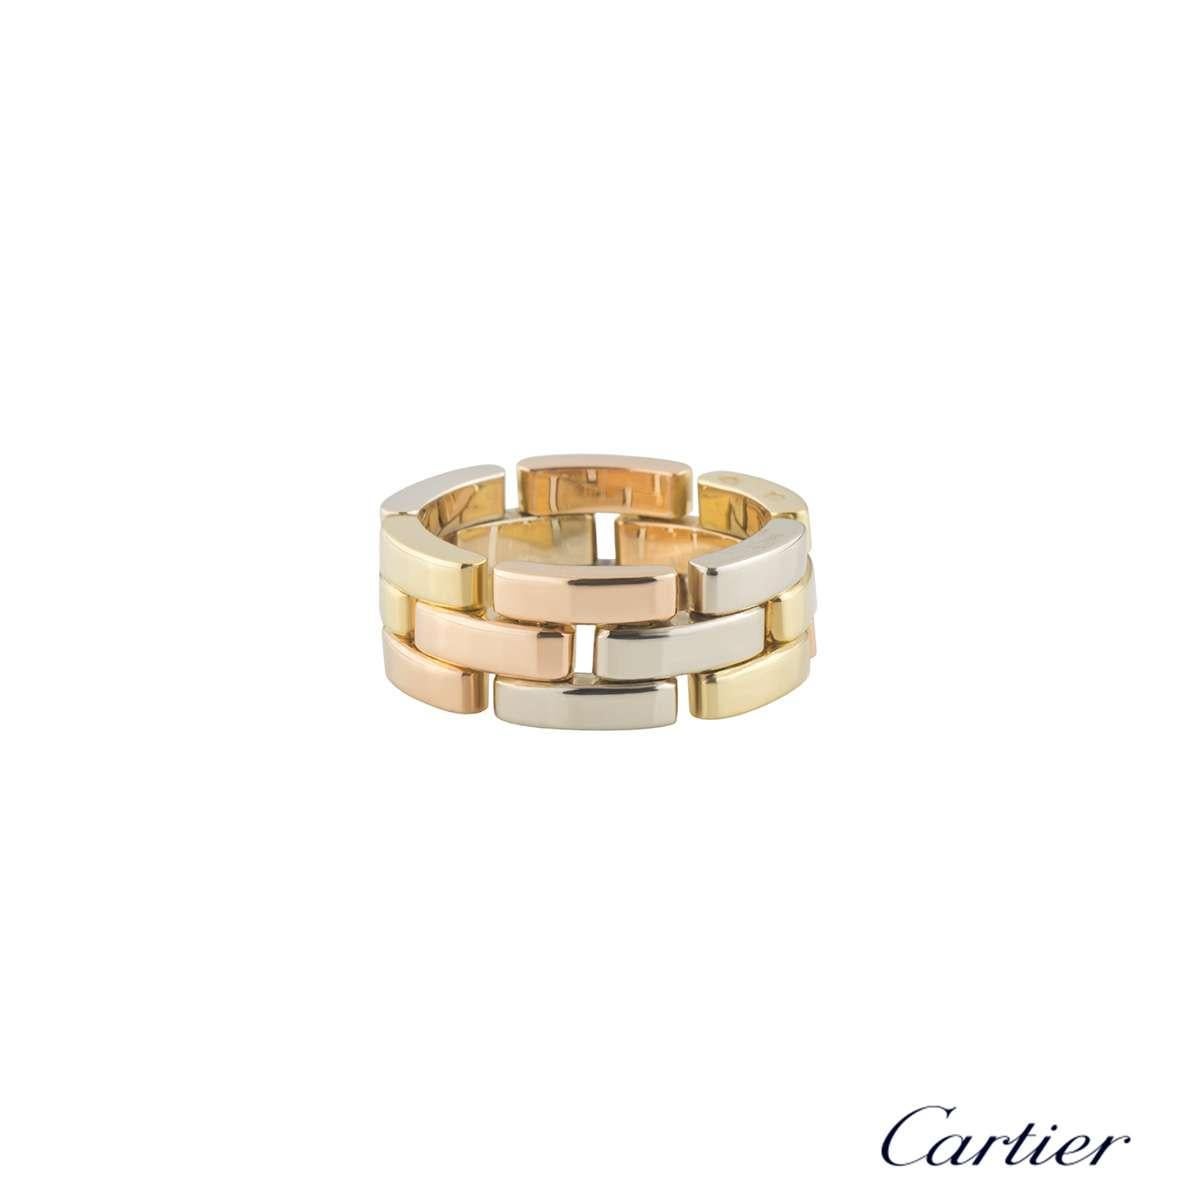 A stunning 18k yellow, white and rose gold Cartier Maillon Panthere ring from the Links and Chains collection. The ring comprises of 18 open brick work design panels. The ring is 8mm in width and is a size UK N½ / EU 54 / US 6 3/4 with a gross